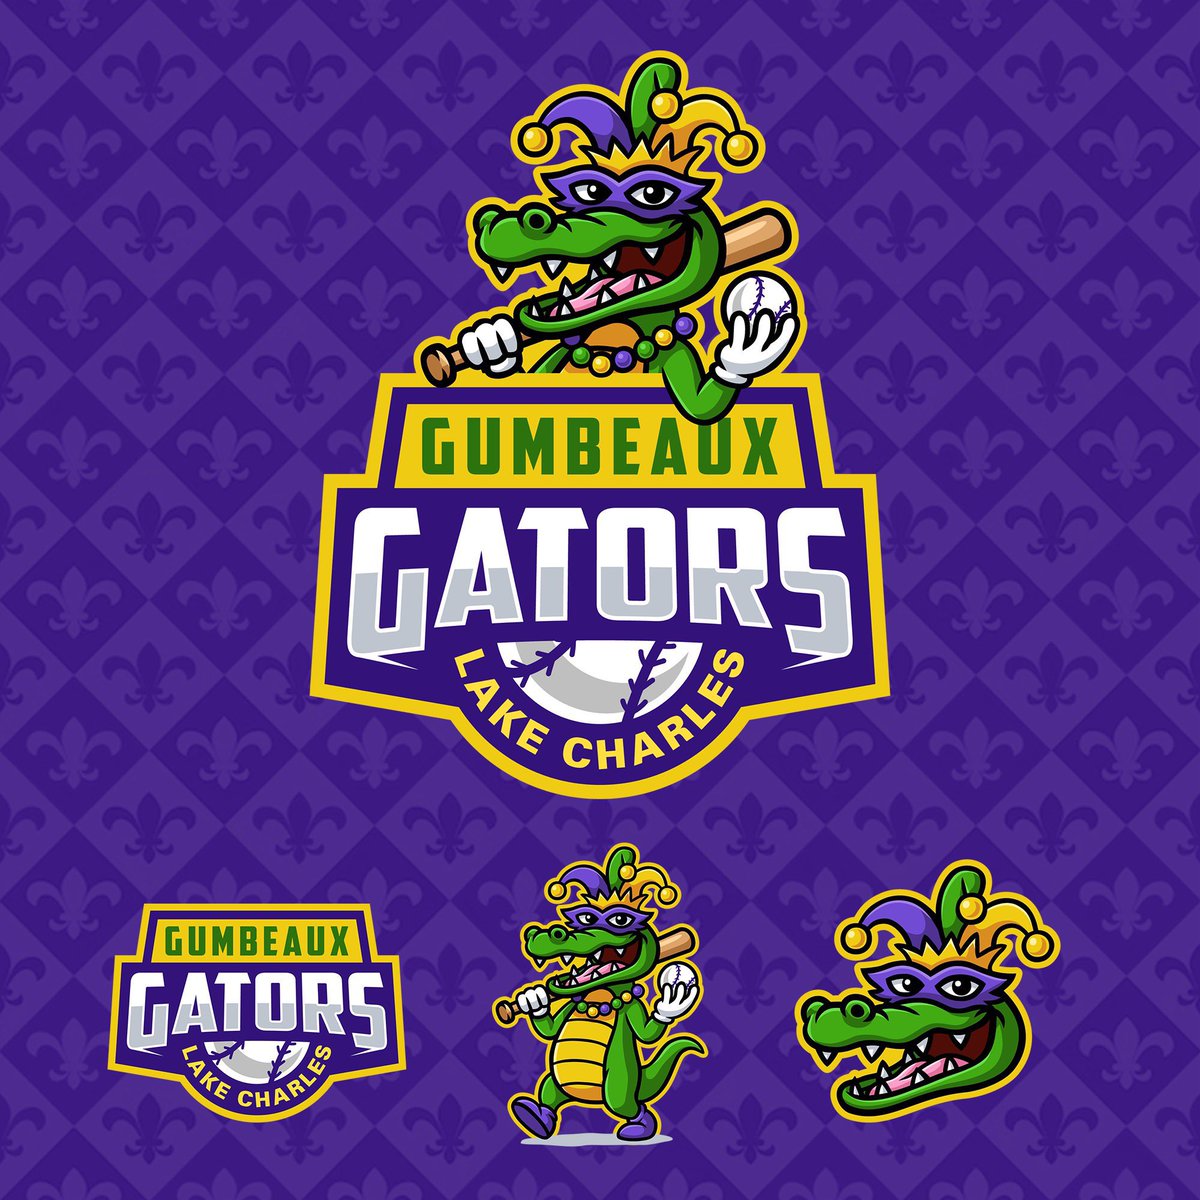 Let’s run it back 👀 🚨 REPOST and let’s share the Gumbeaux Gators brand to the whole baseball world! 🐊⚾️ We’re bringing Lake Charles a thrilling minor league baseball experience this summer. 🔥 #GeauxGators #GumbeauxGators